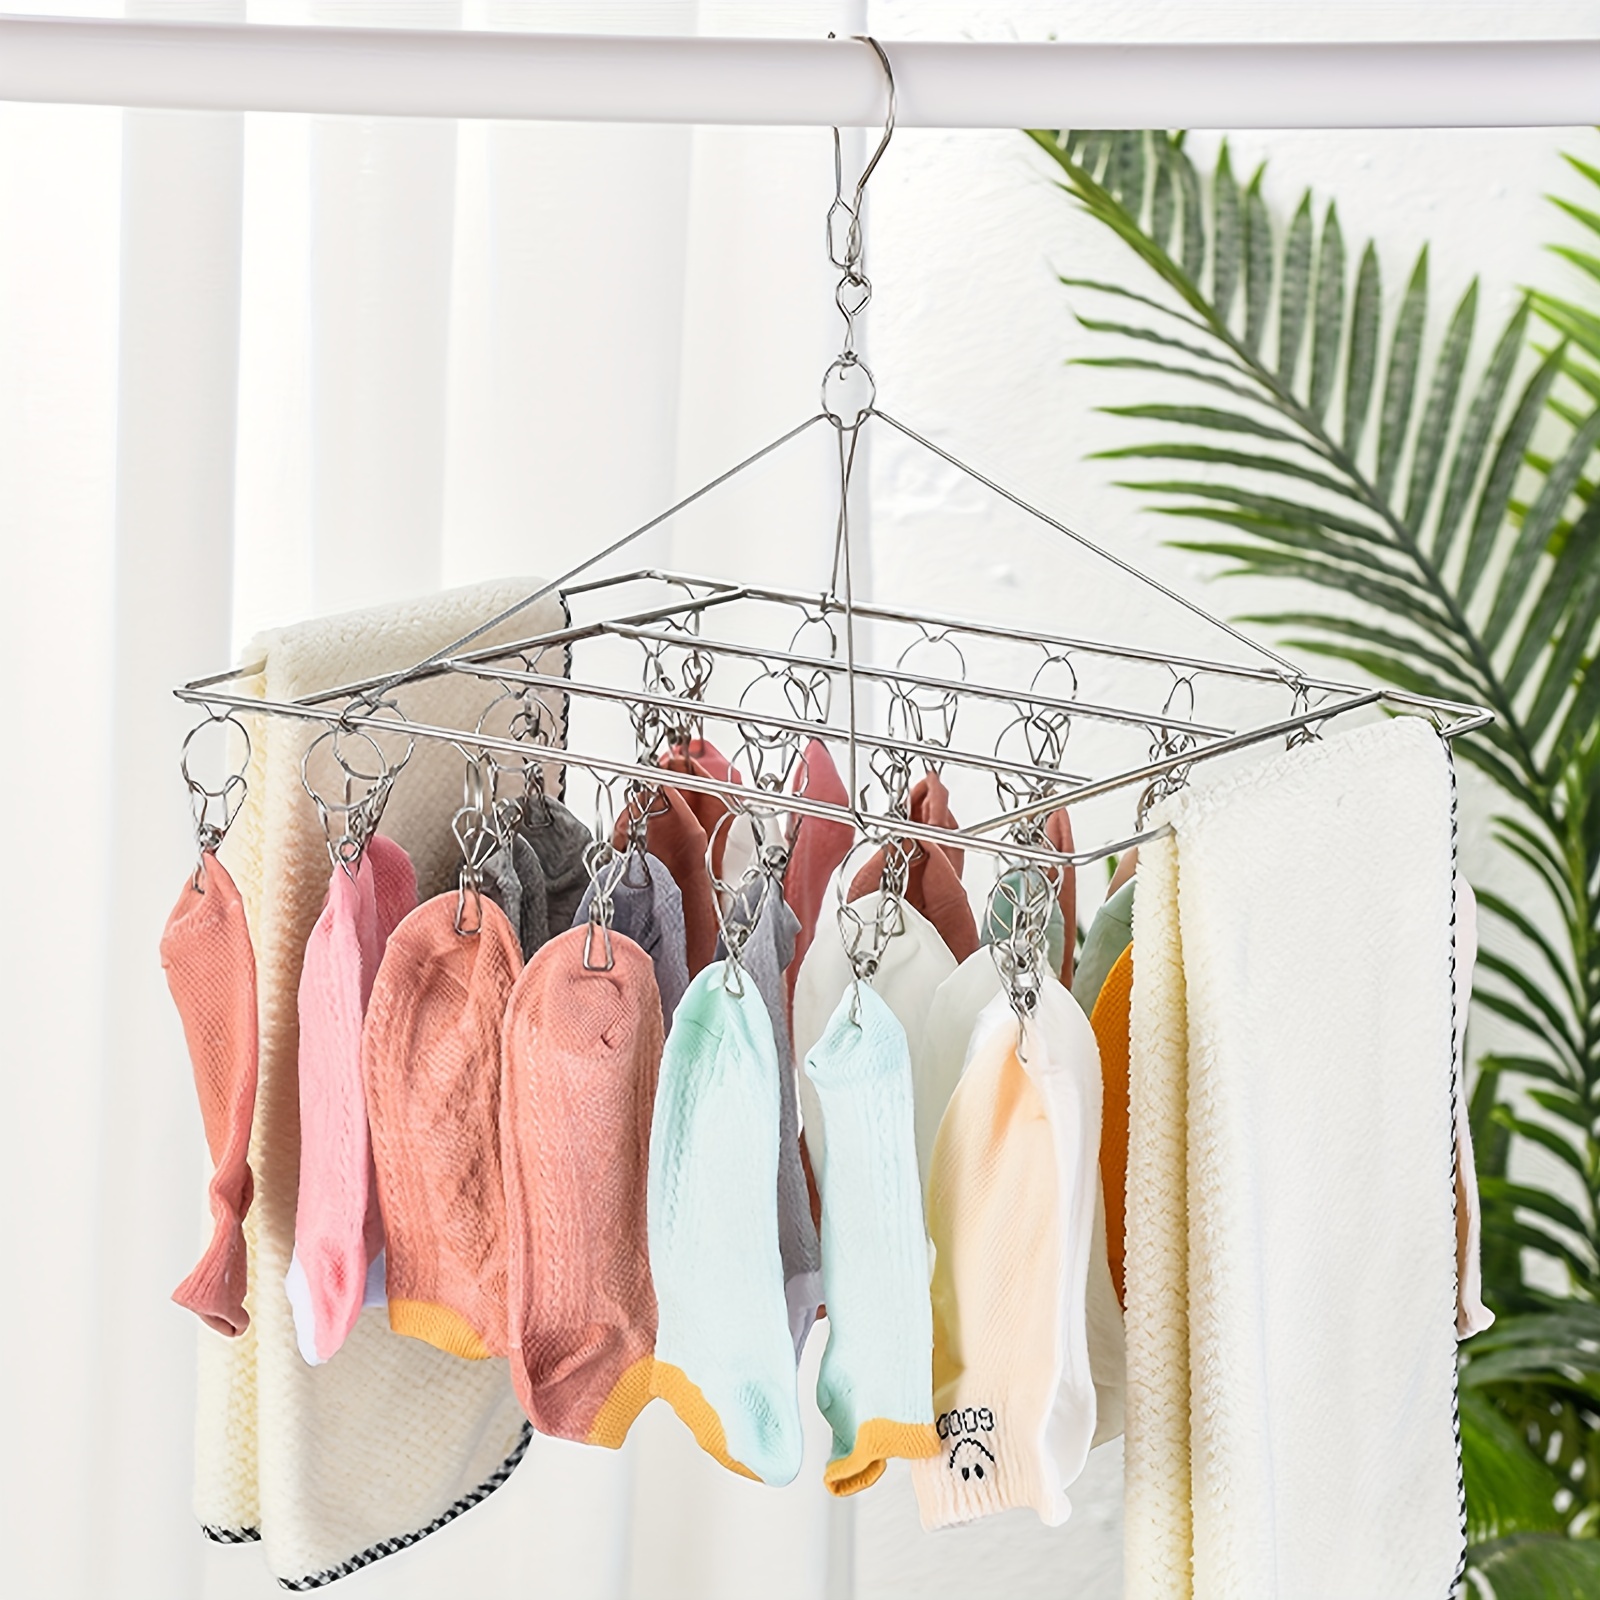 Organization and Storage Gnobogi Windproof Sock Clips Hanger, Clothes Drying Rack with 360 Swivel Hook and Strong Clips for Drying and Organize